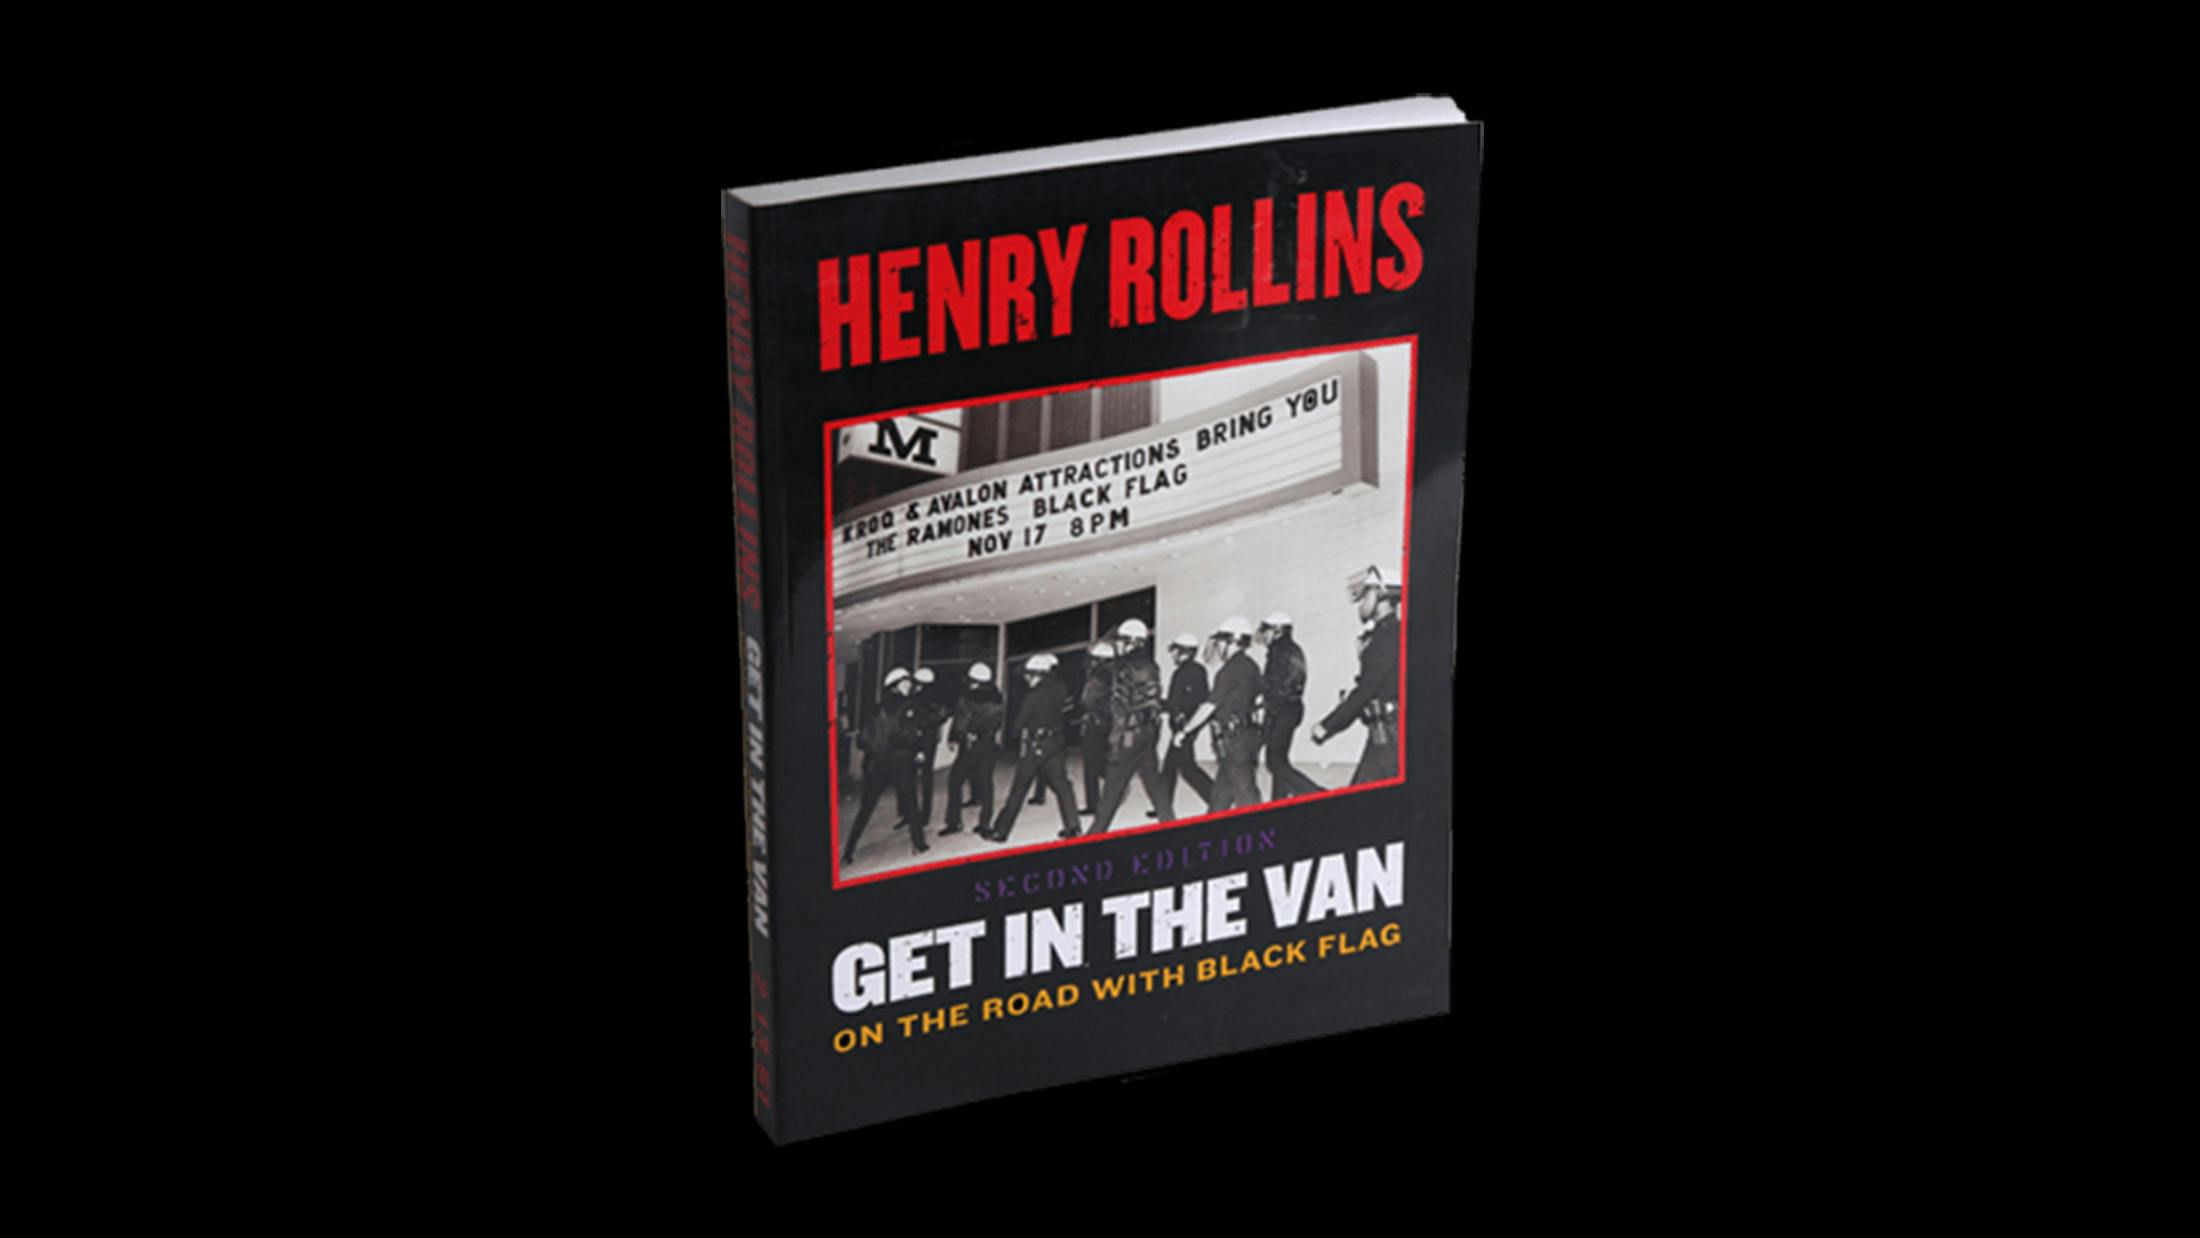 Want to know what it’s really like on the road in a punk band? This is essential reading. Whether you're a Black Flag and Henry Rollins n00b or a self-professed aficionado, this is almost as important as listening to Damaged or My War. 

$25.00 / £18.71

http://bit.ly/2BJ26iG